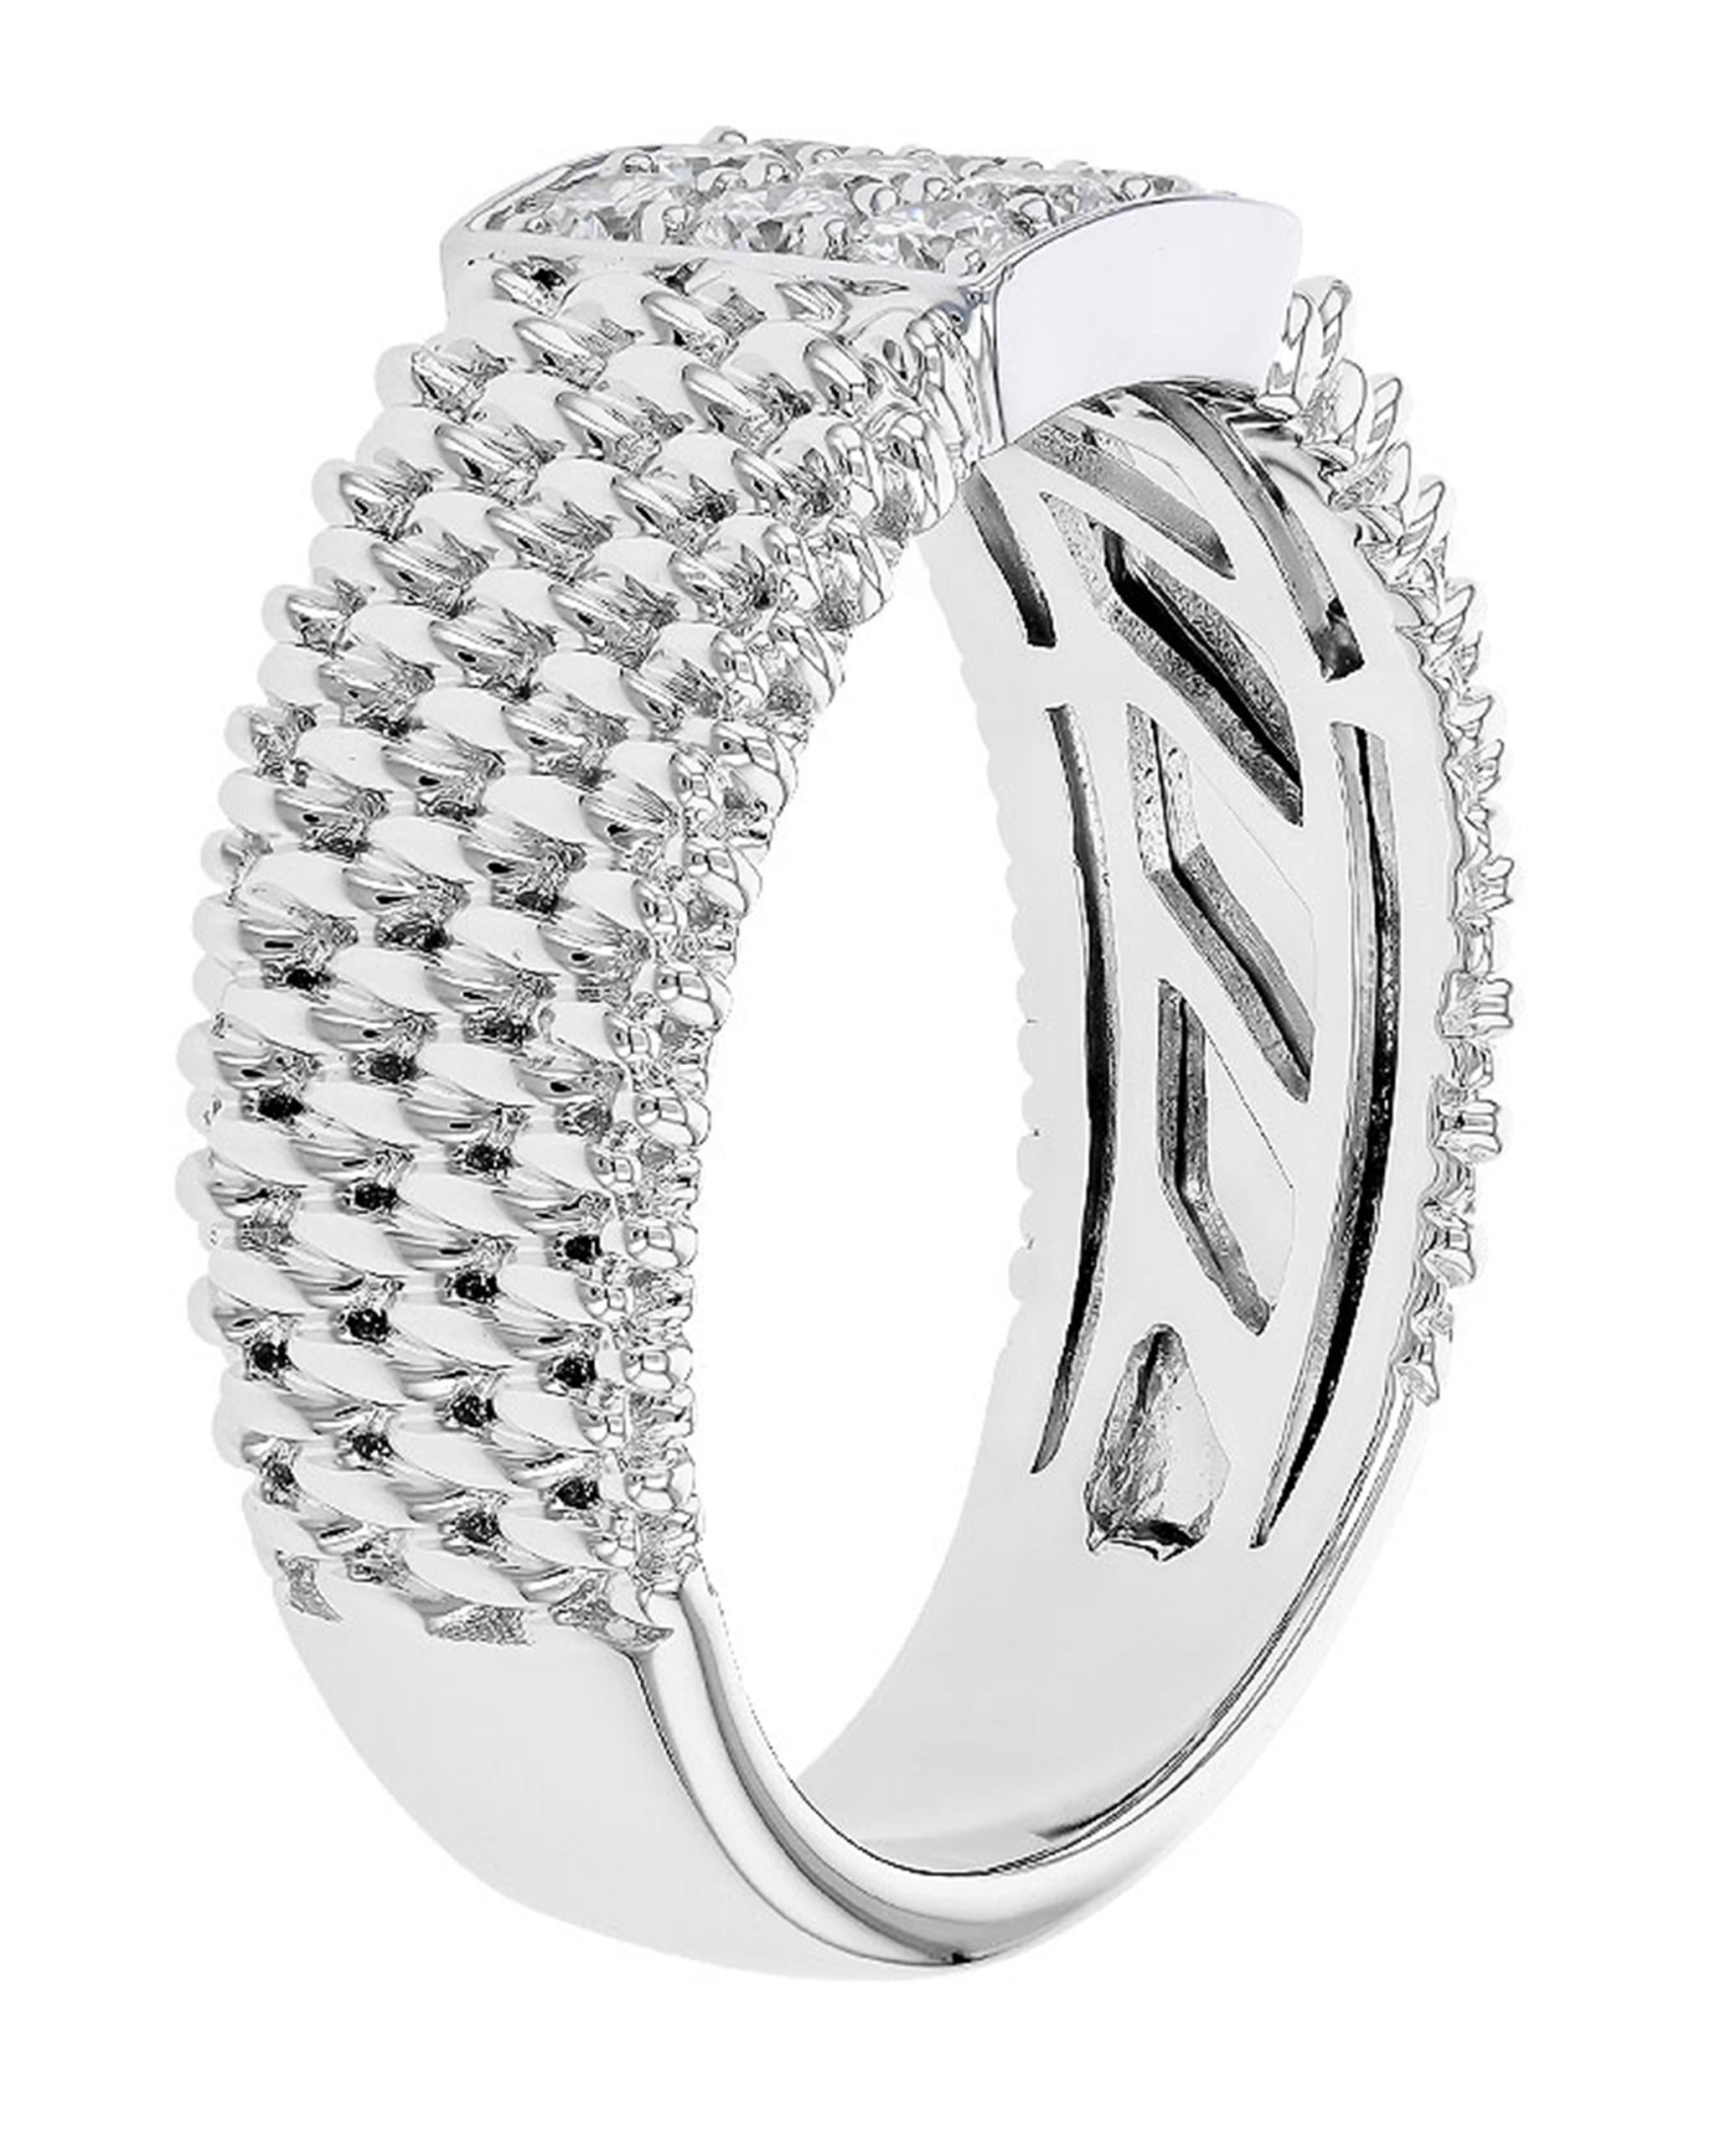 Contemporary Allison Kaufman 14K White Gold Mesh Ring with Diamonds For Sale